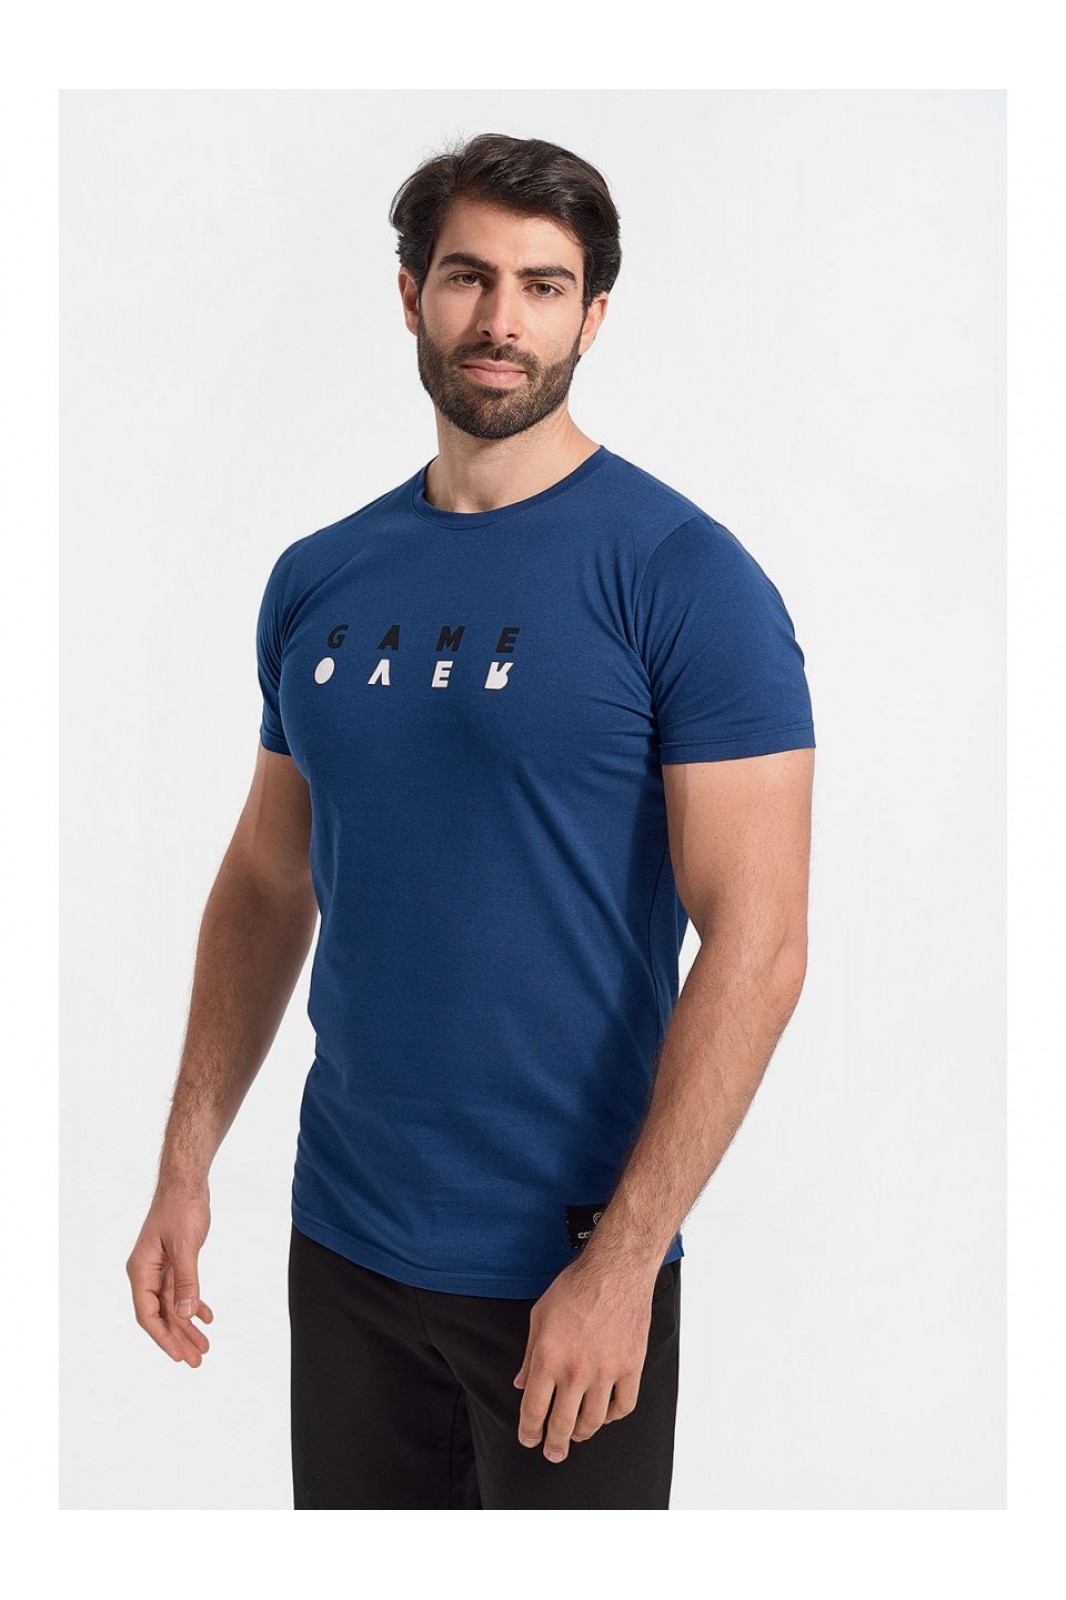 COTTON4ALL Mens T-Shirt GAME OVER Navy